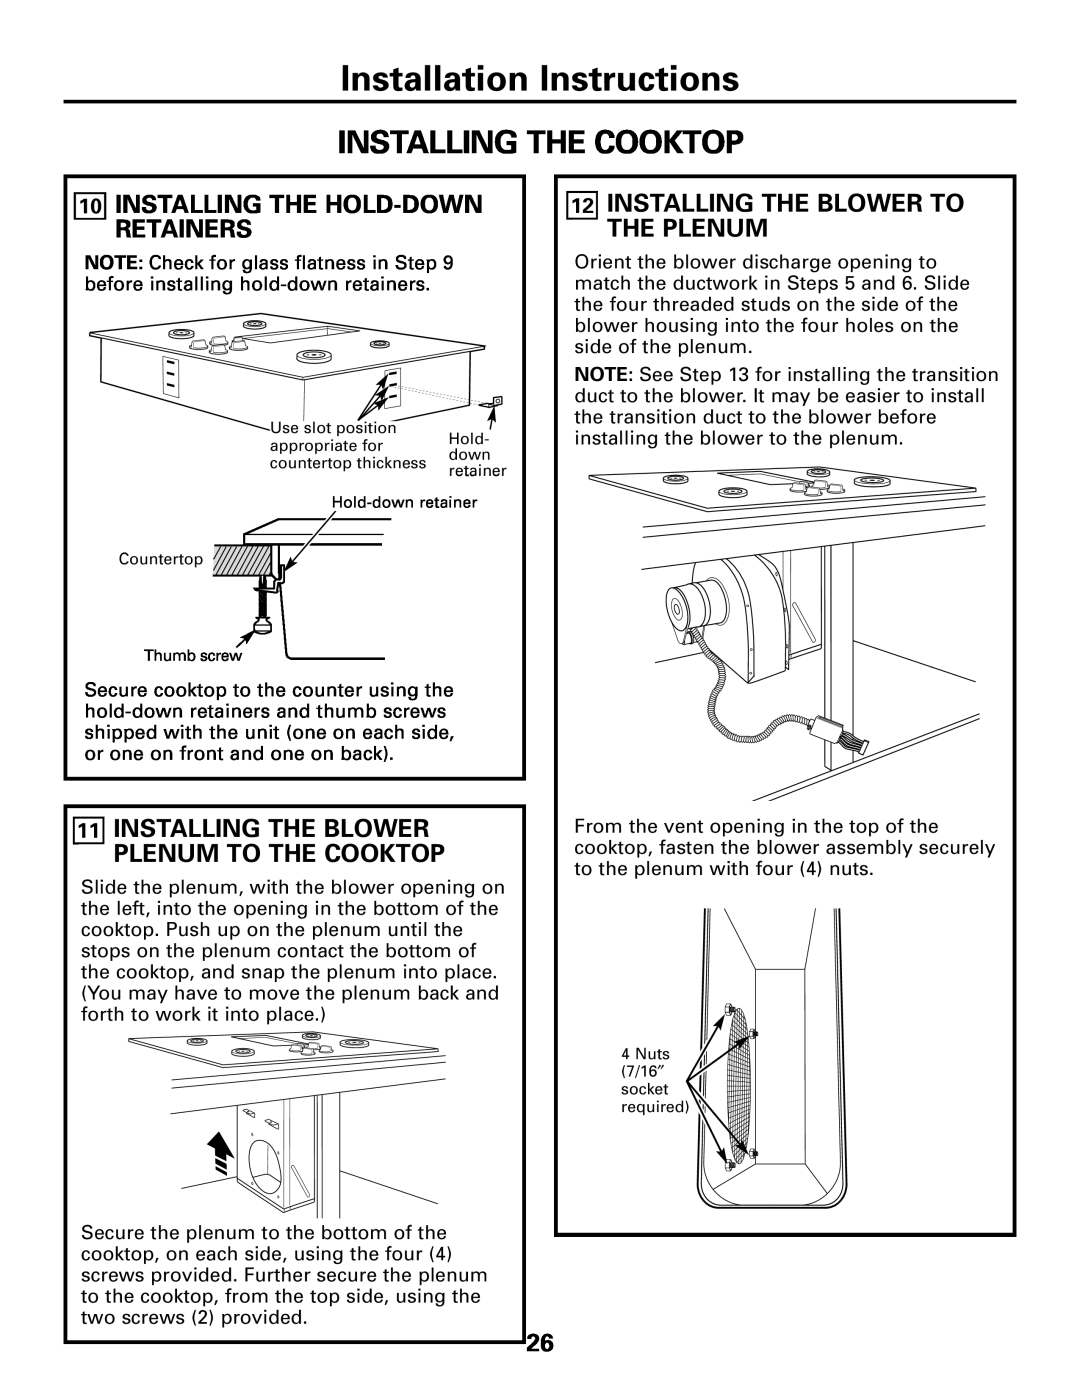 GE JGP989 manual Installation Instructions, Installing The Cooktop, 10INSTALLING THE HOLD-DOWNRETAINERS 